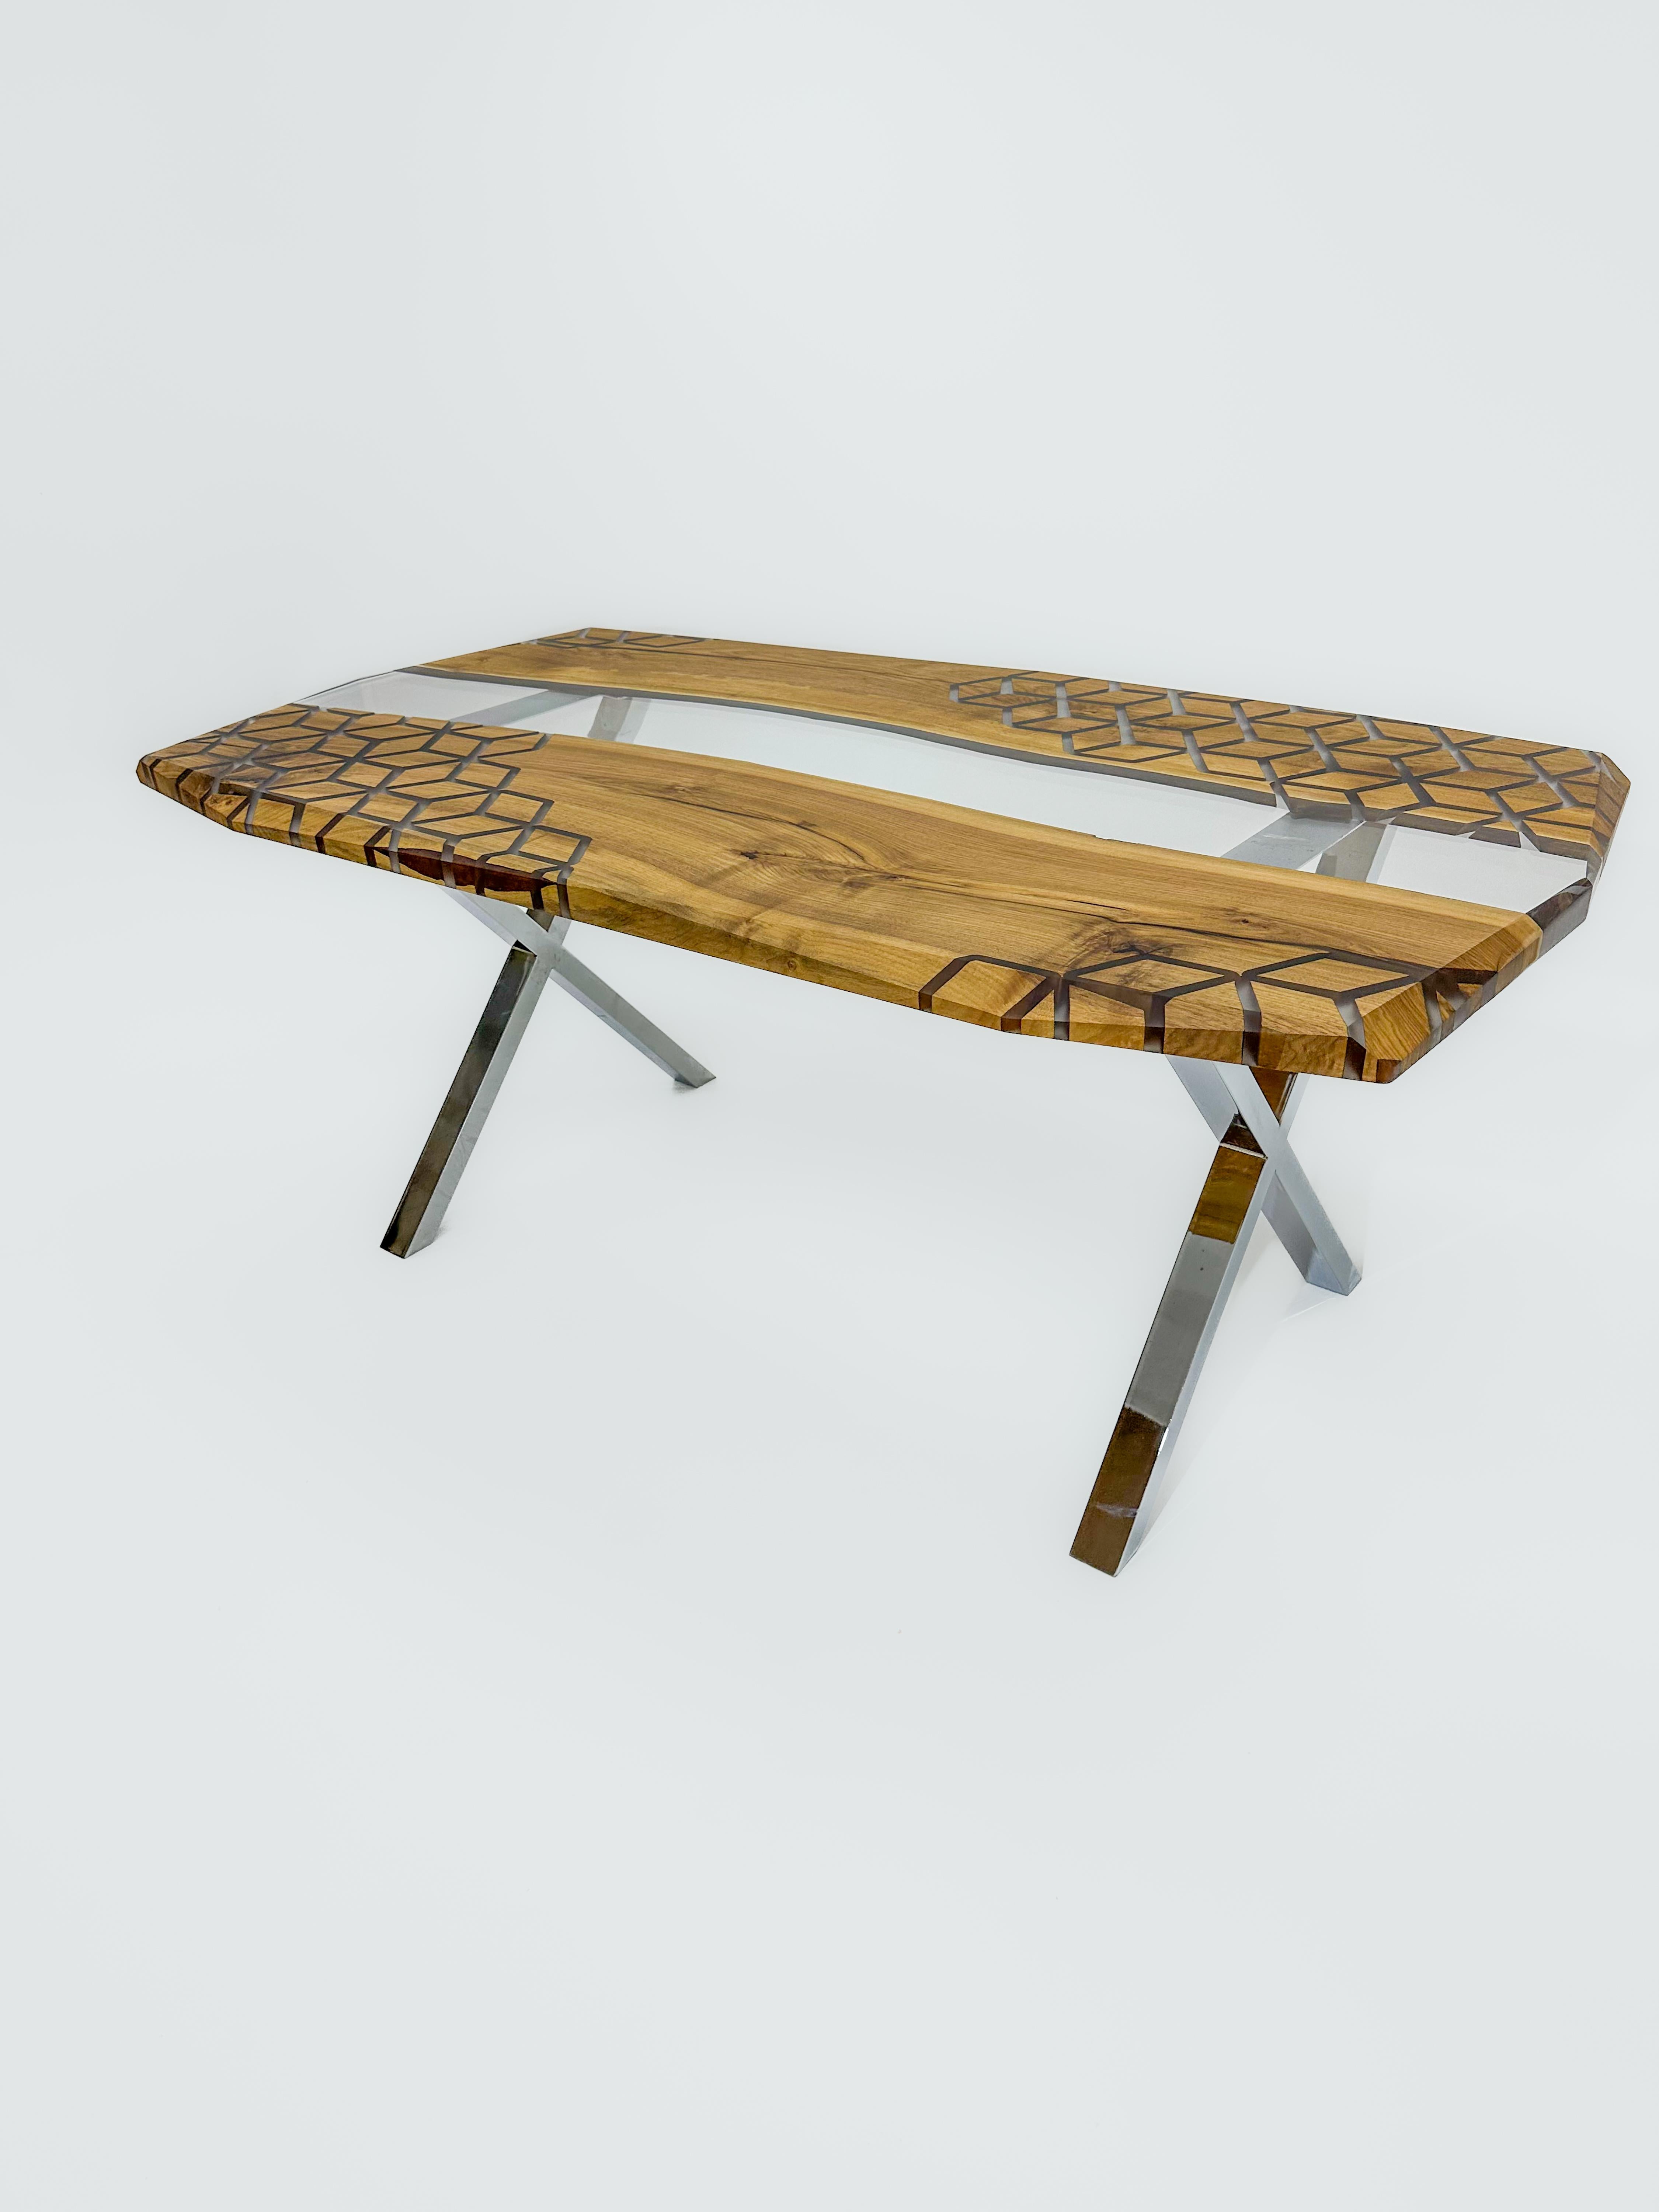 Walnut Epoxy Resin Table

This table is made of 500 years old ancient walnut wood. The patterns are made with CNC. Other parts are completely handmade.

Custom sizes, colours and finishes are available!